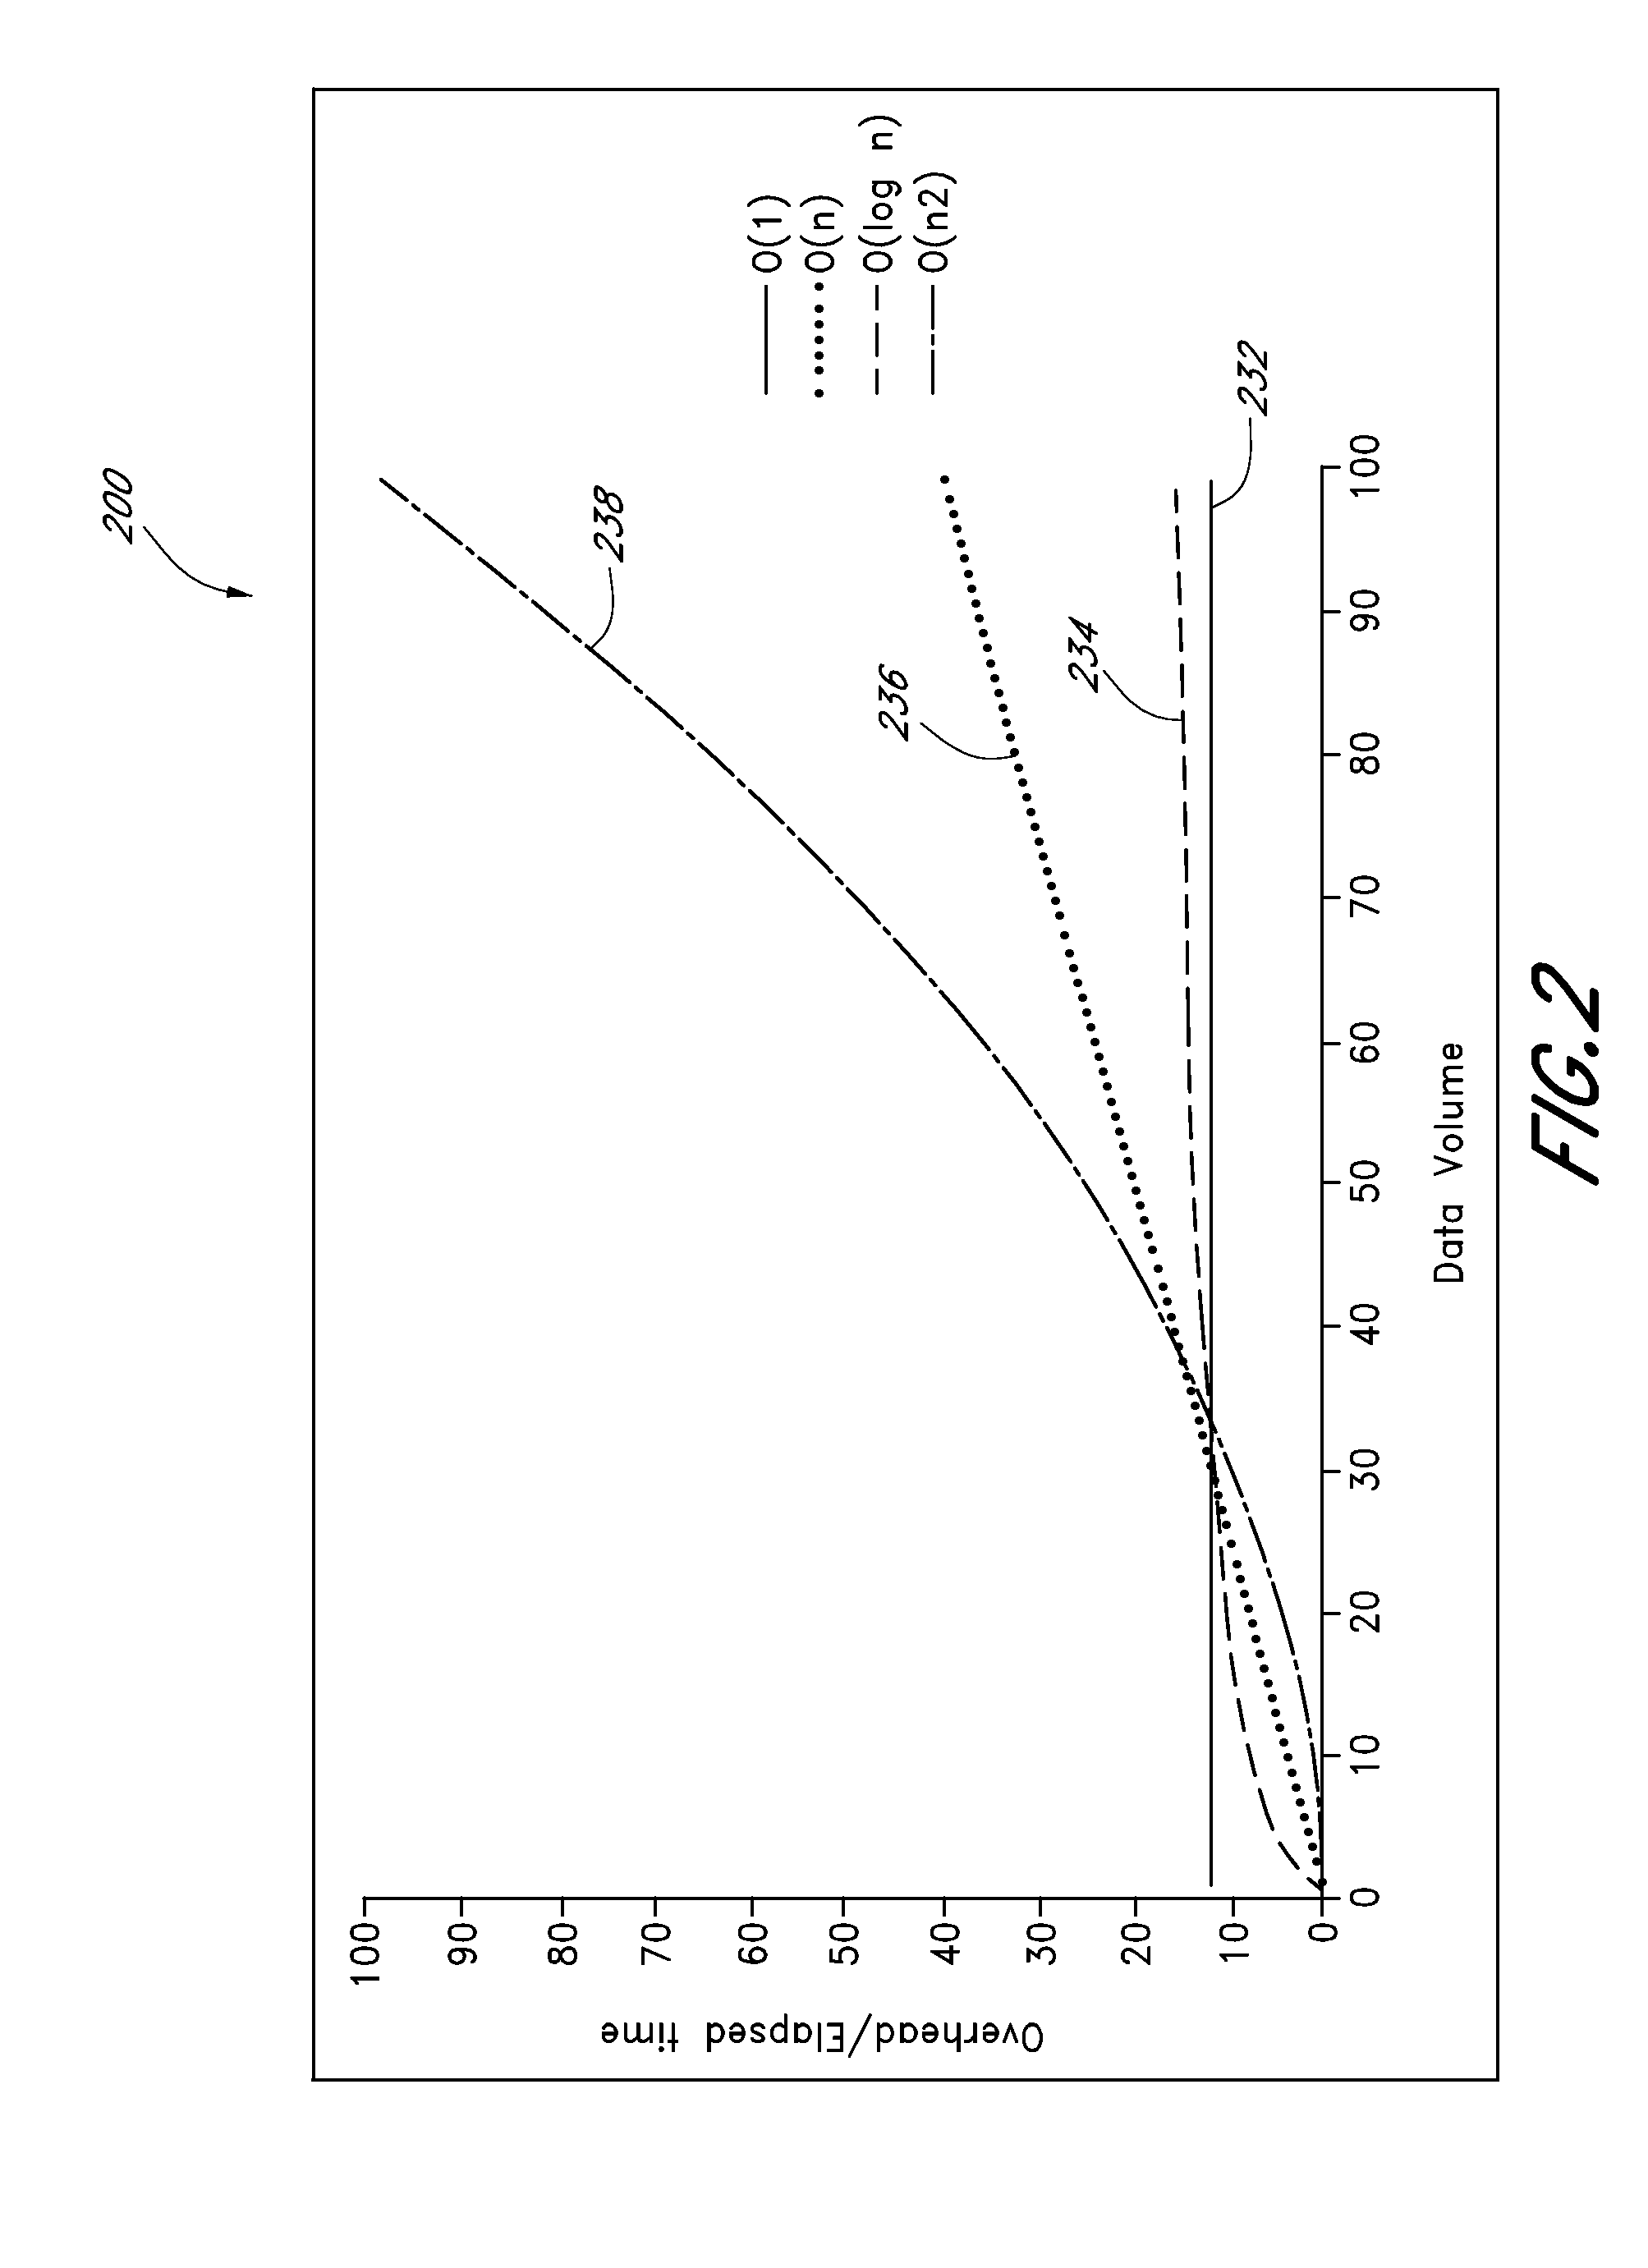 Computer systems and methods for predictive performance management of data transactions